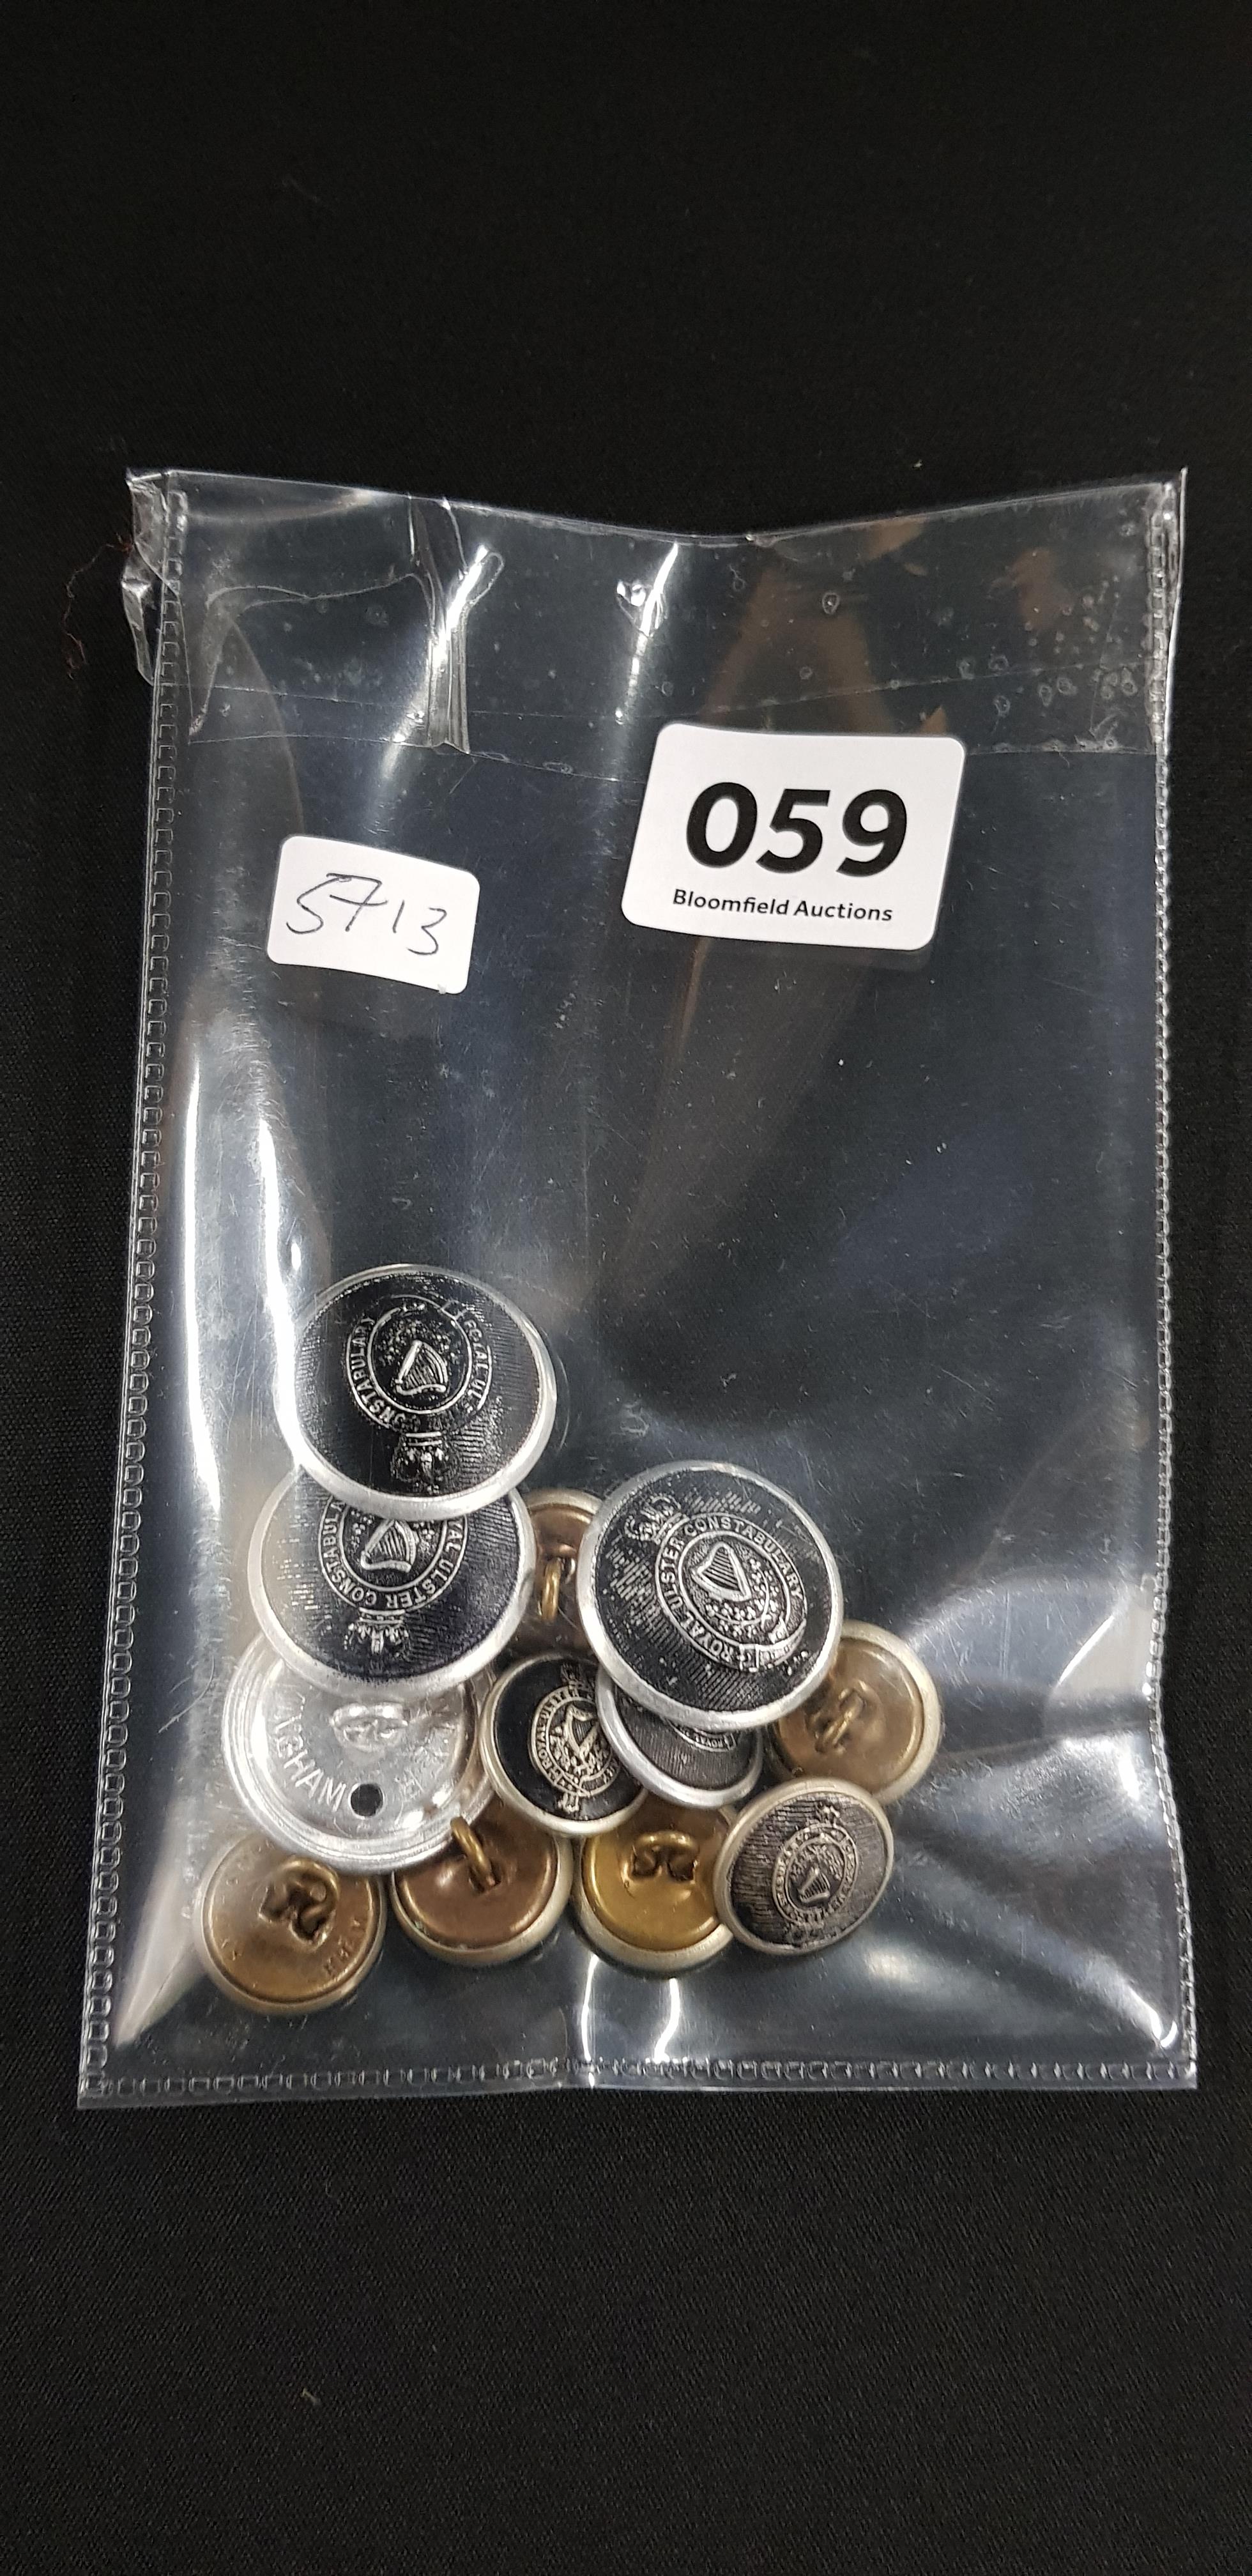 BAG OF RUC BUTTONS